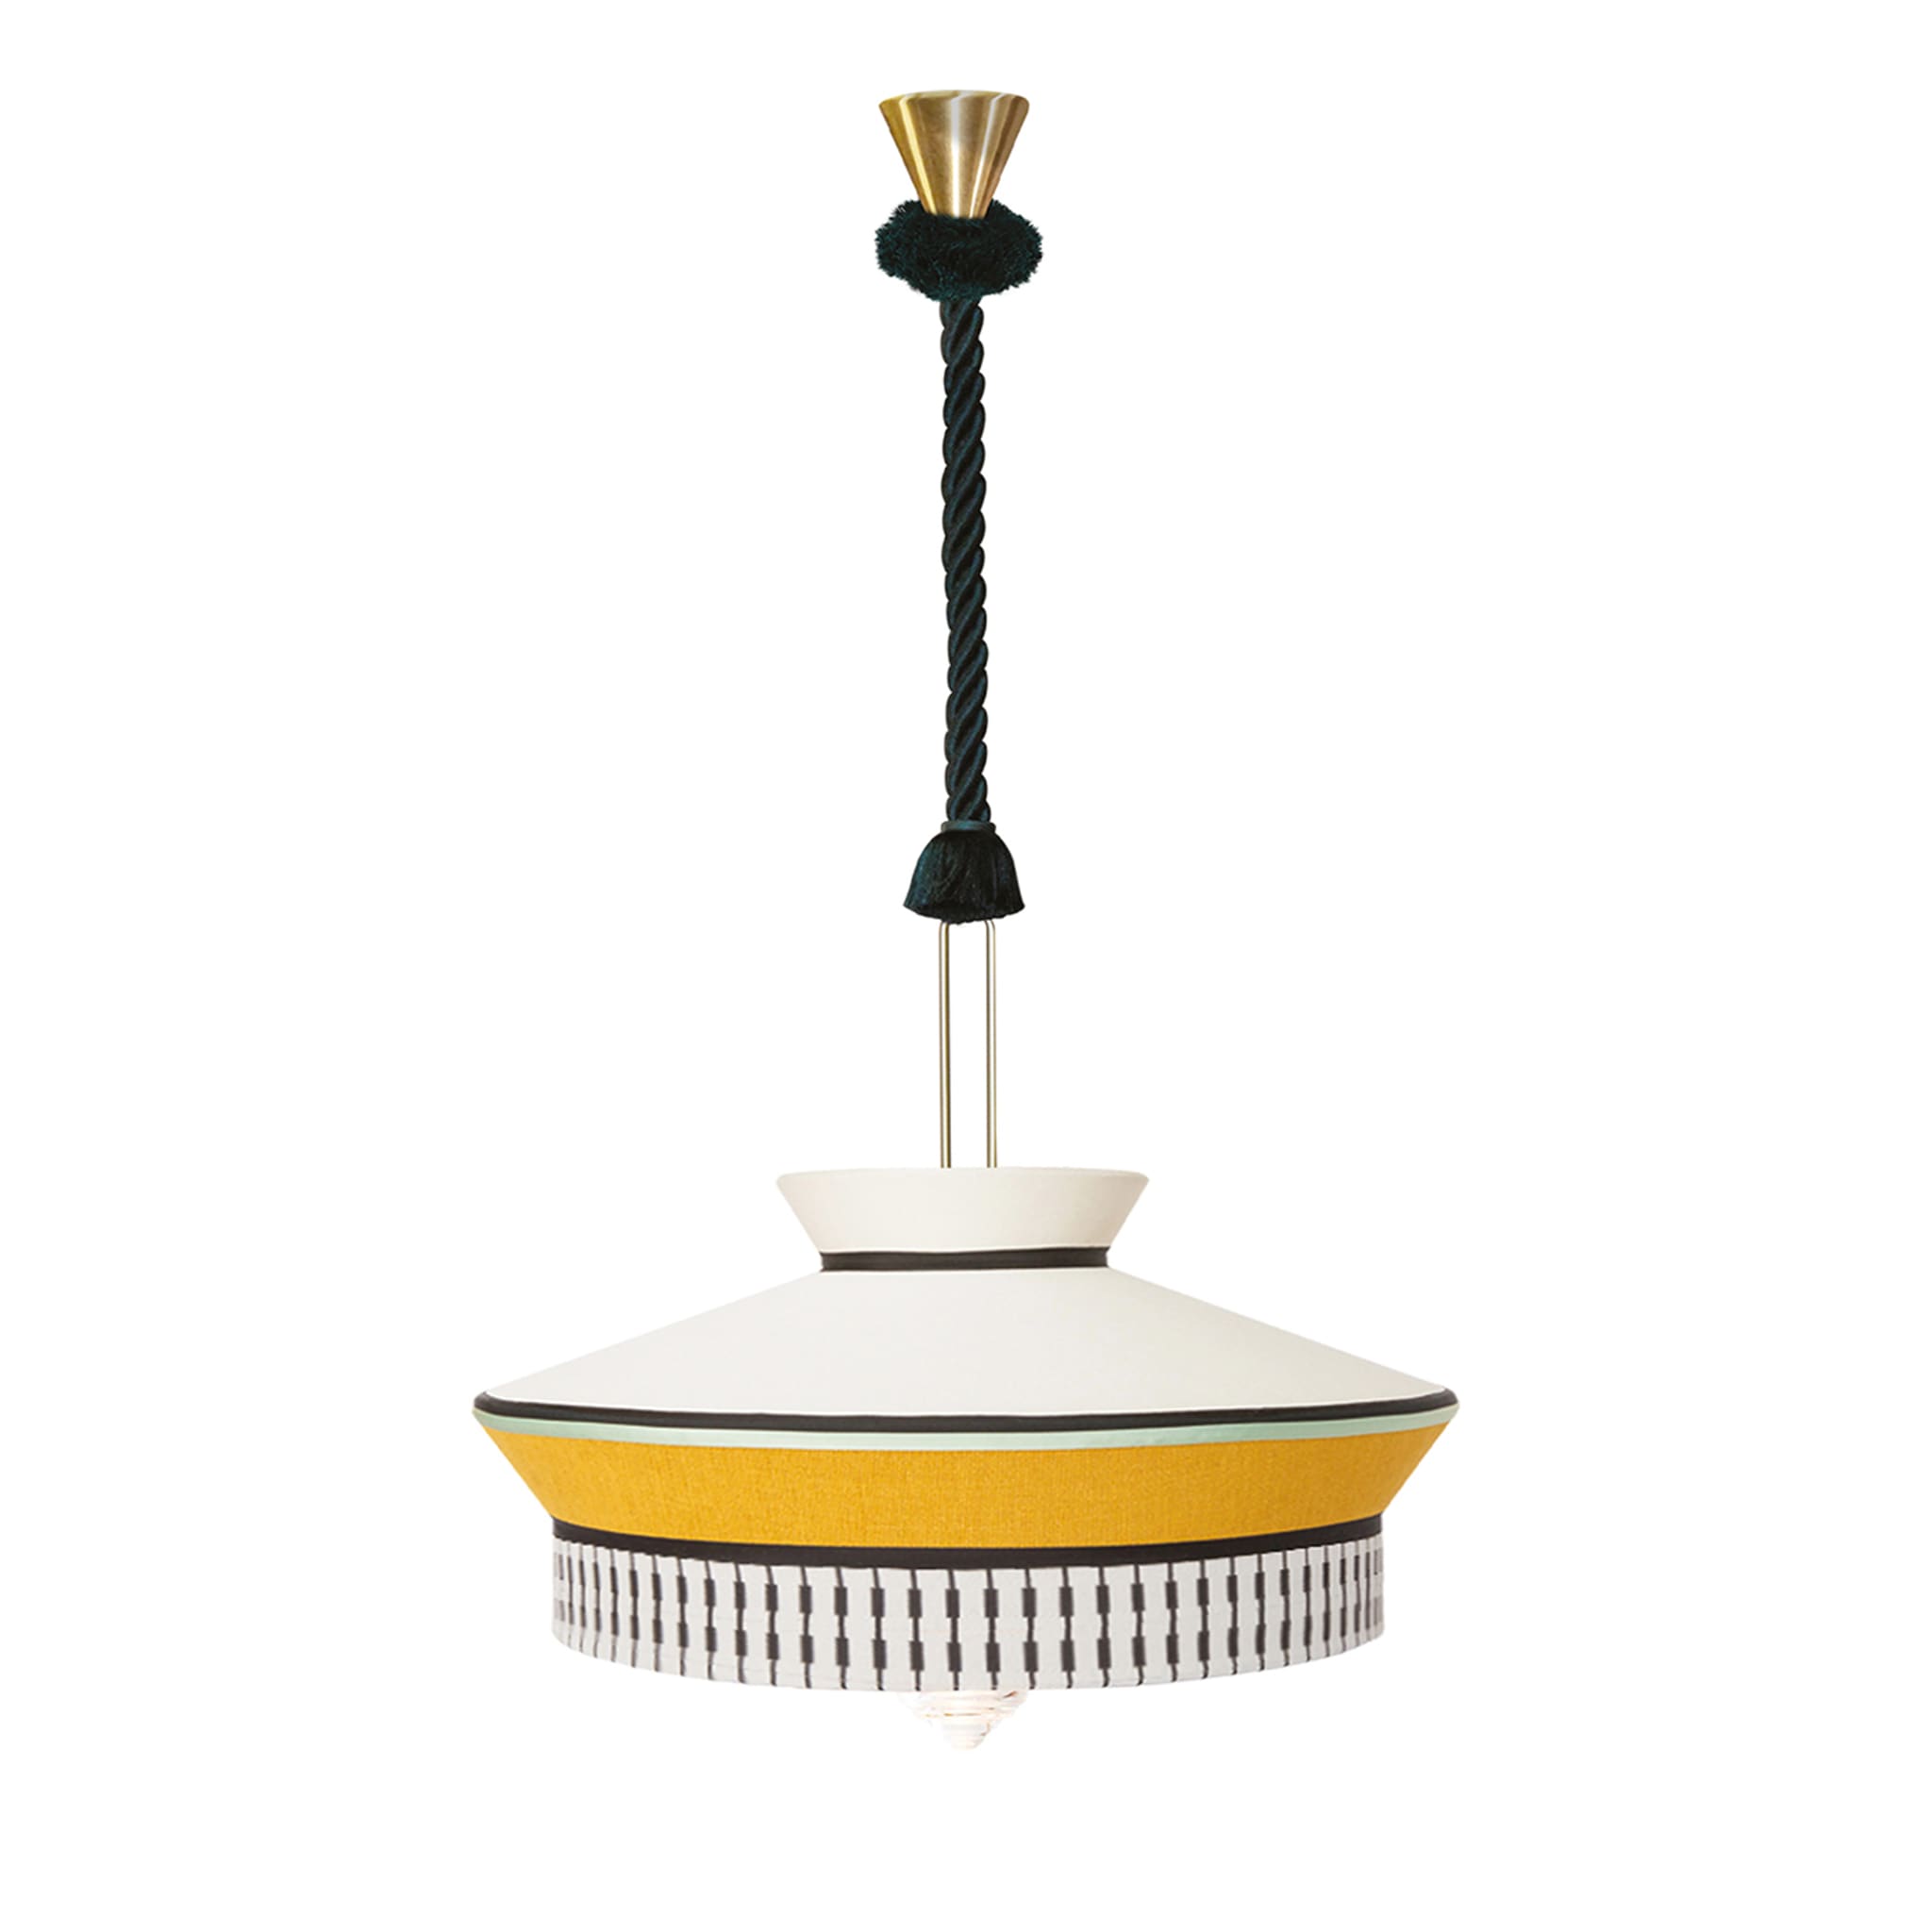 Calypso Martinique Xl Yellow Indoor Pendant Lamp By Servomuto - Main view